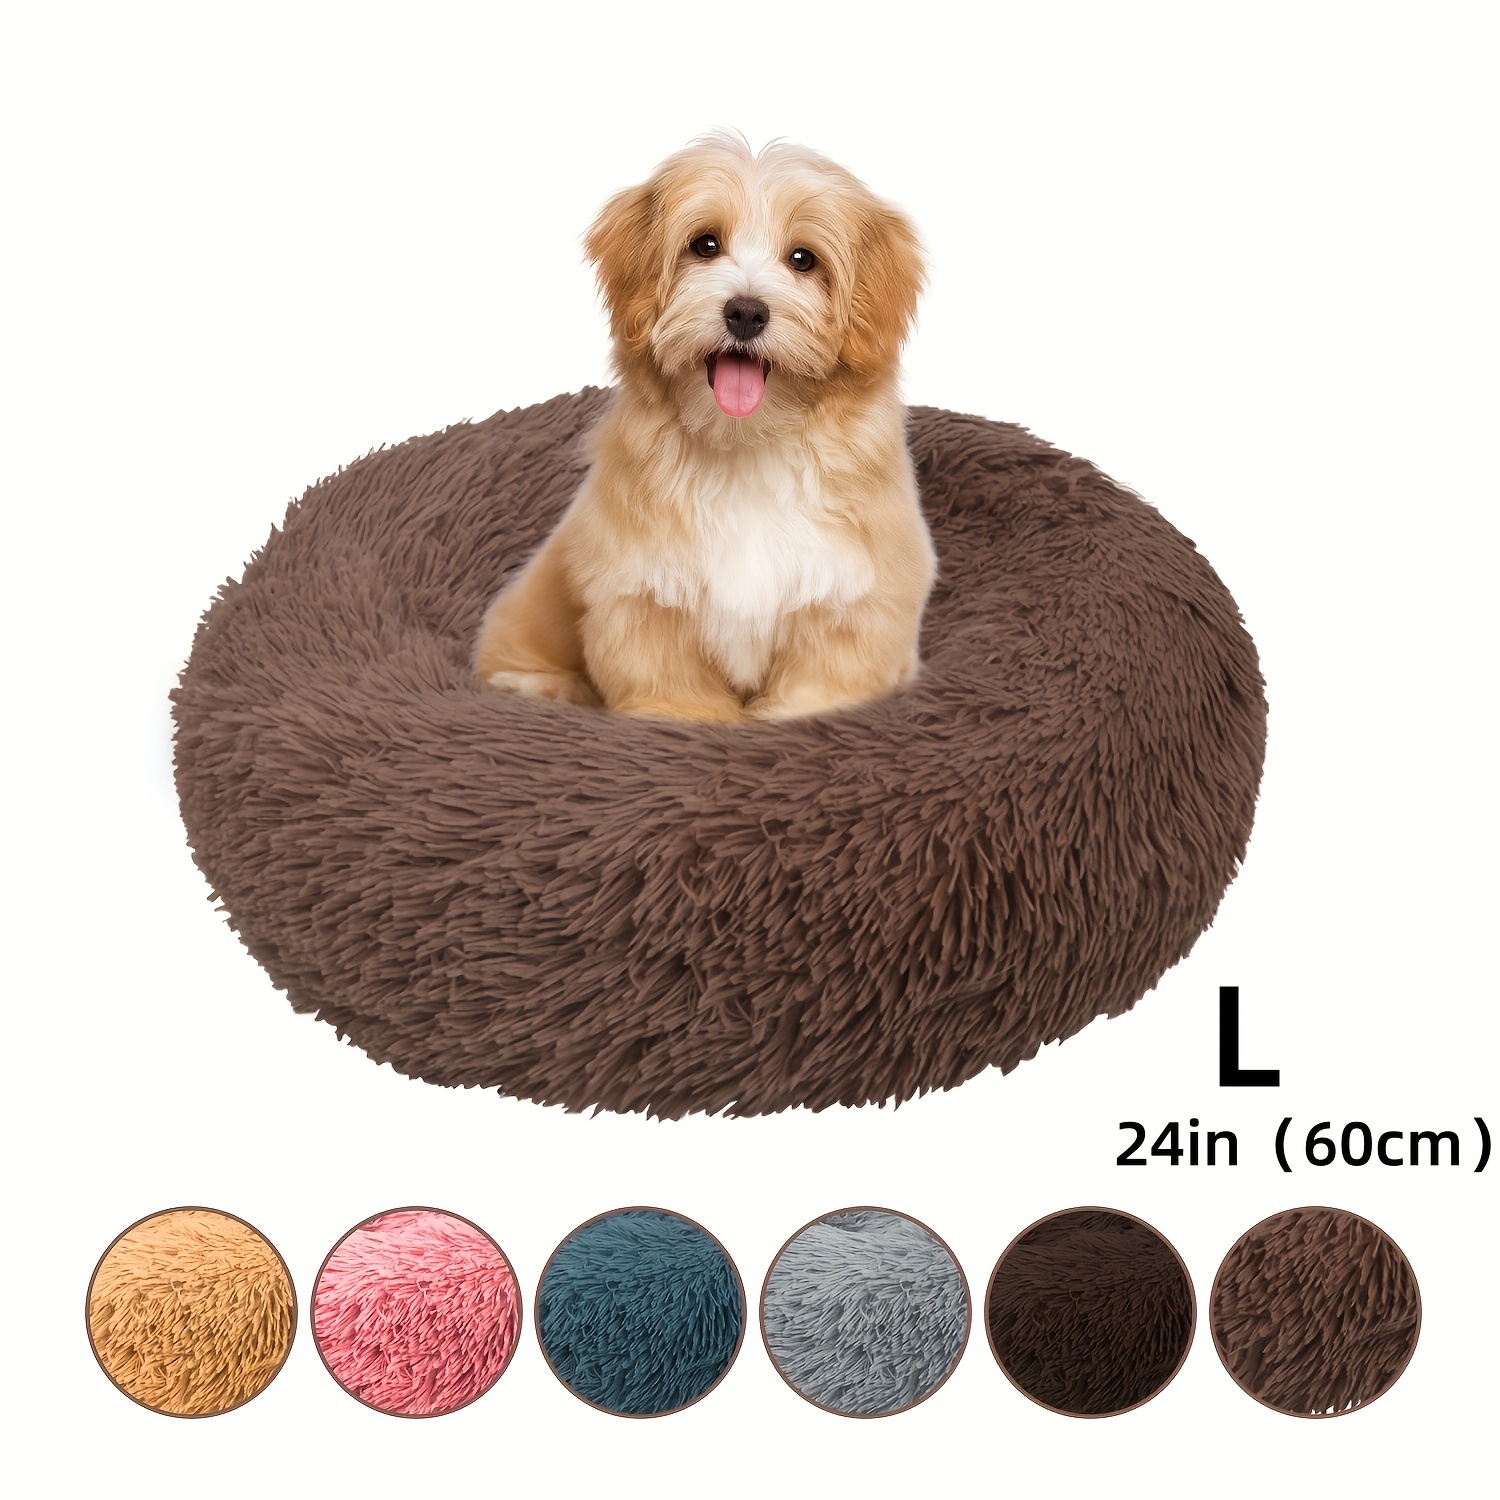 

Calming Dog & Cat Bed, Donut Cuddler Warming Cozy Soft Round Bed, Fluffy Faux Fur Plush Cushion Bed For Small Medium And Large Dogs And Cats (16"/20"/24"/28"/31"/39")